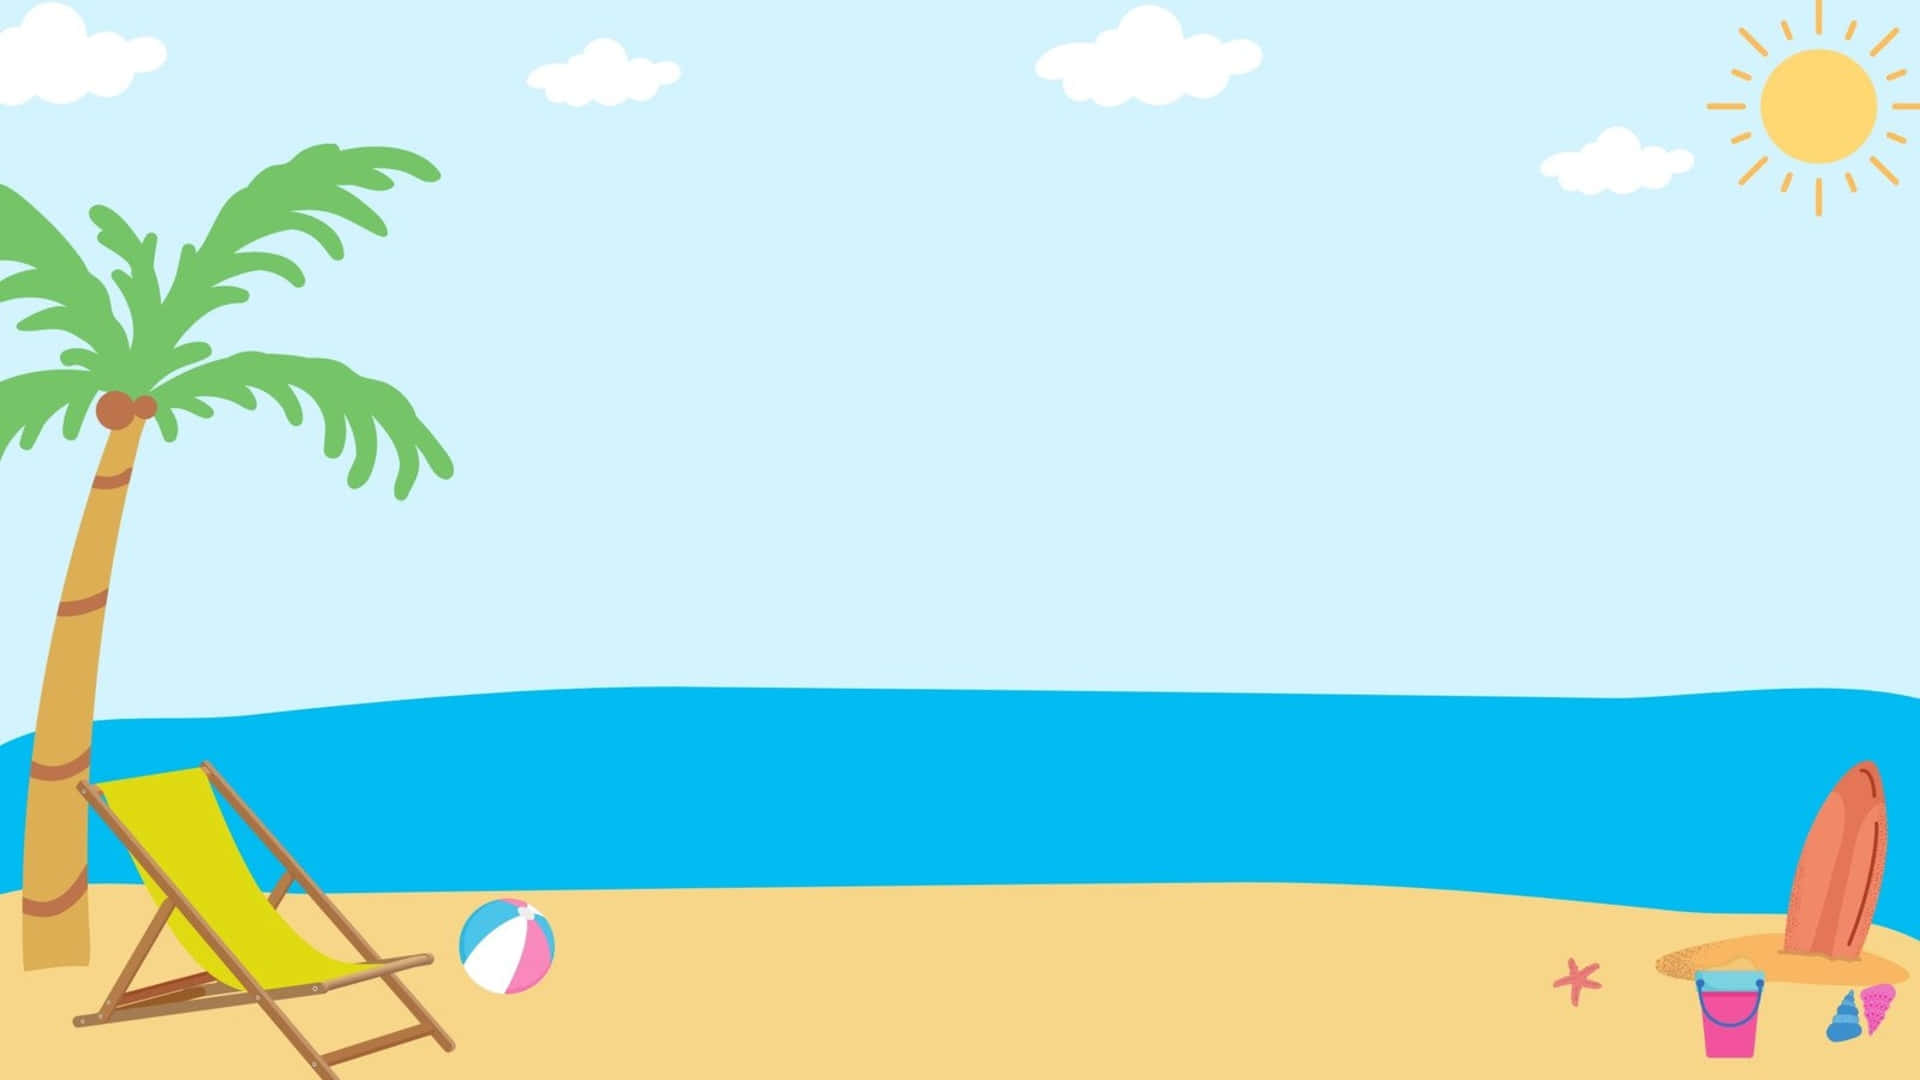 Get ready for summer with this cheerful Zoom background